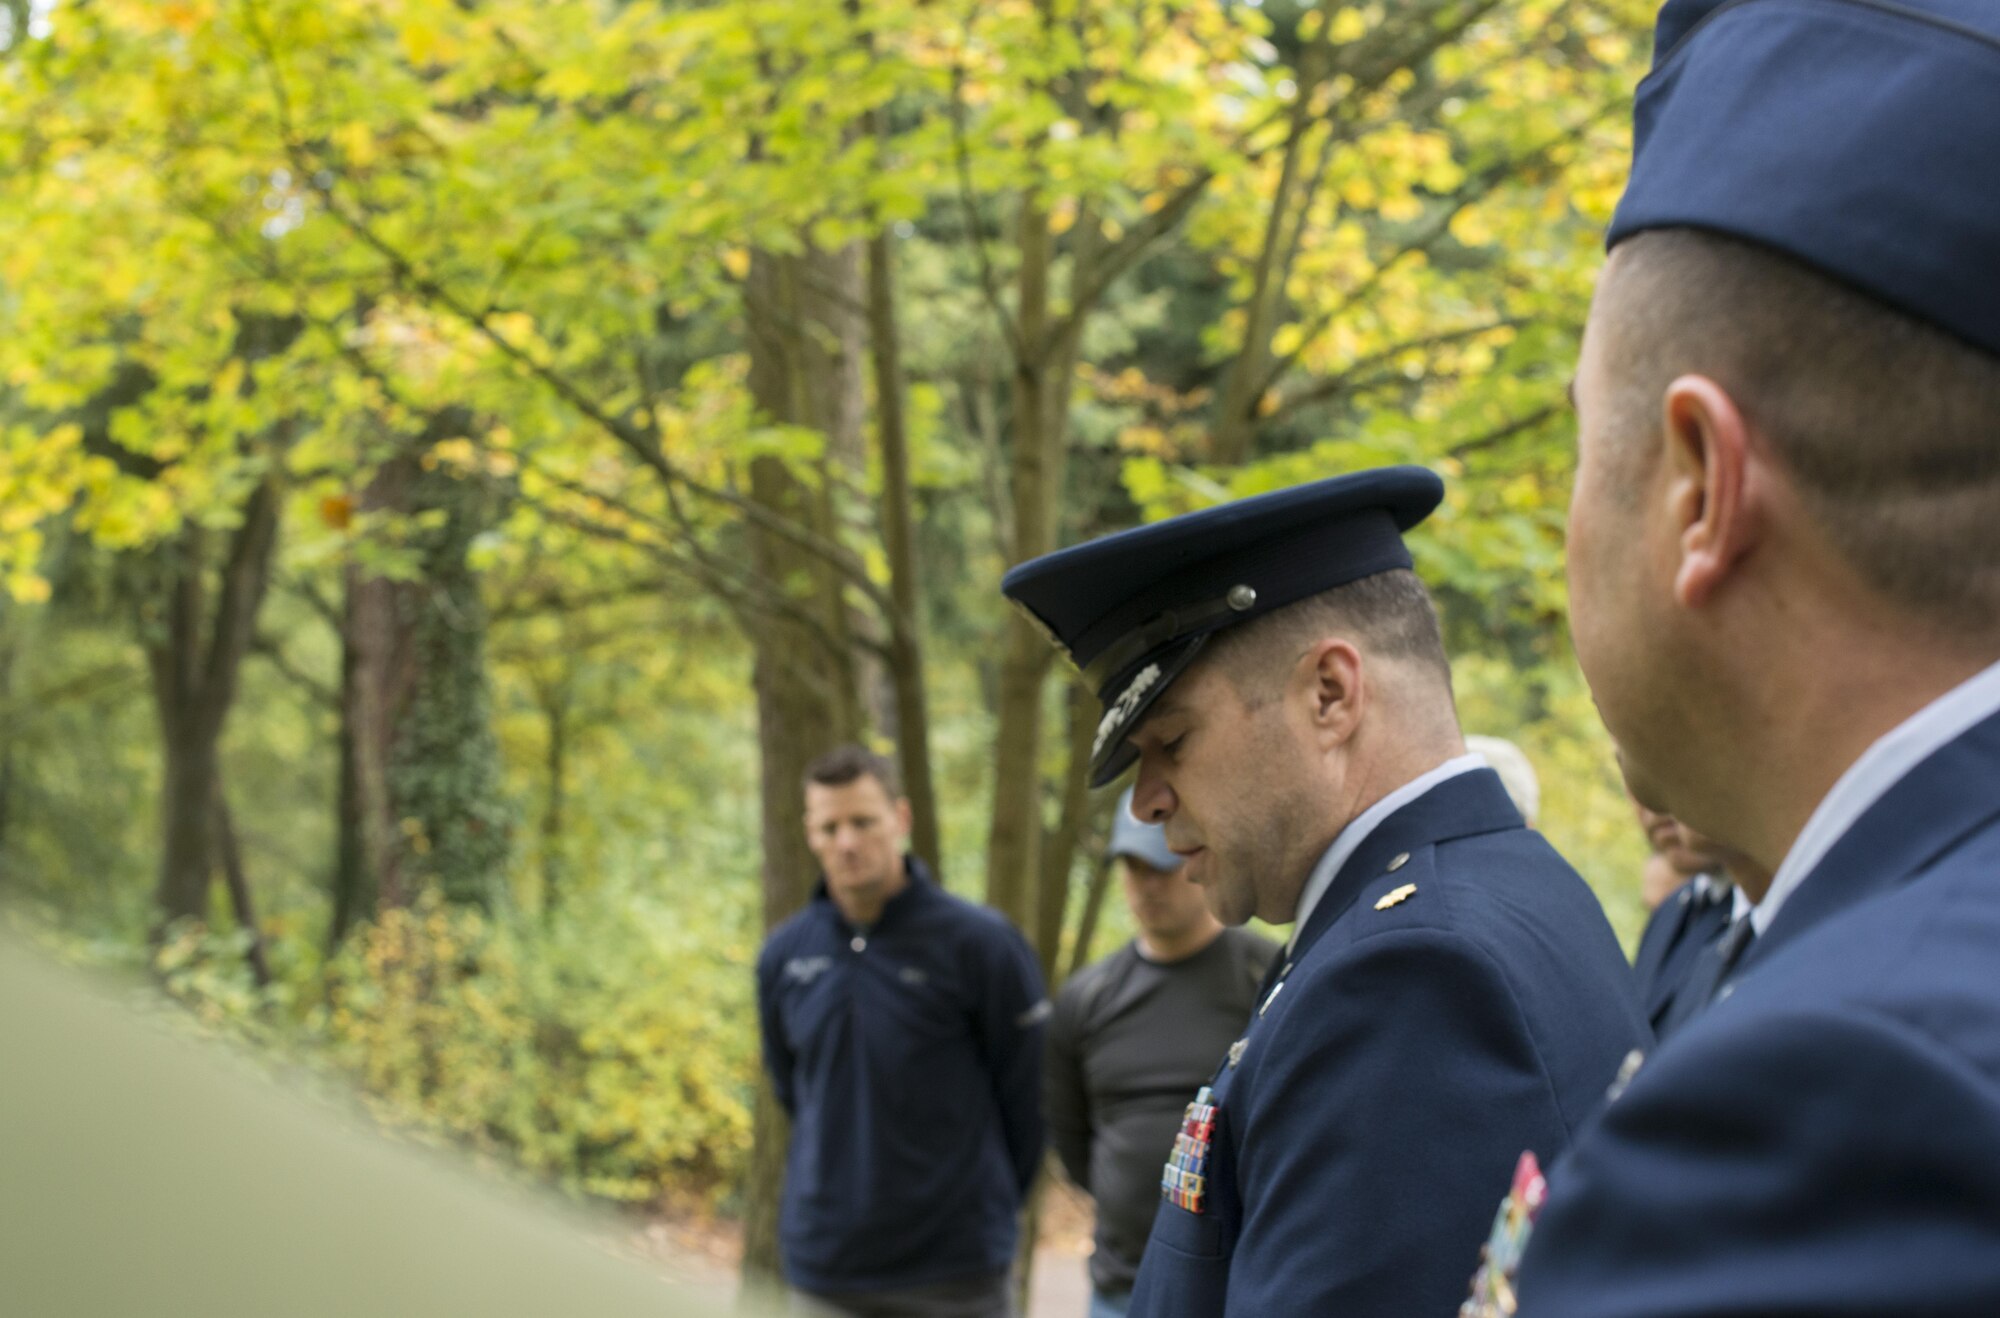 Maj. David Horton, 86th Airlift Wing chaplain, speaks at a dedication ceremony for Gary Currie, an infant who lost his life in 1952, at the American Kindergraves in Kaiserslautern, Germany, Oct. 15, 2016. Joy Caffey, Gary’s mother, does not know where her son is laid to rest. Her family reached out to the Ramstein Area Chiefs’ Group and they offered to dedicate a gravestone to Gary within the Kindergraves. (U.S. Air Force photo by Senior Airman Tryphena Mayhugh)